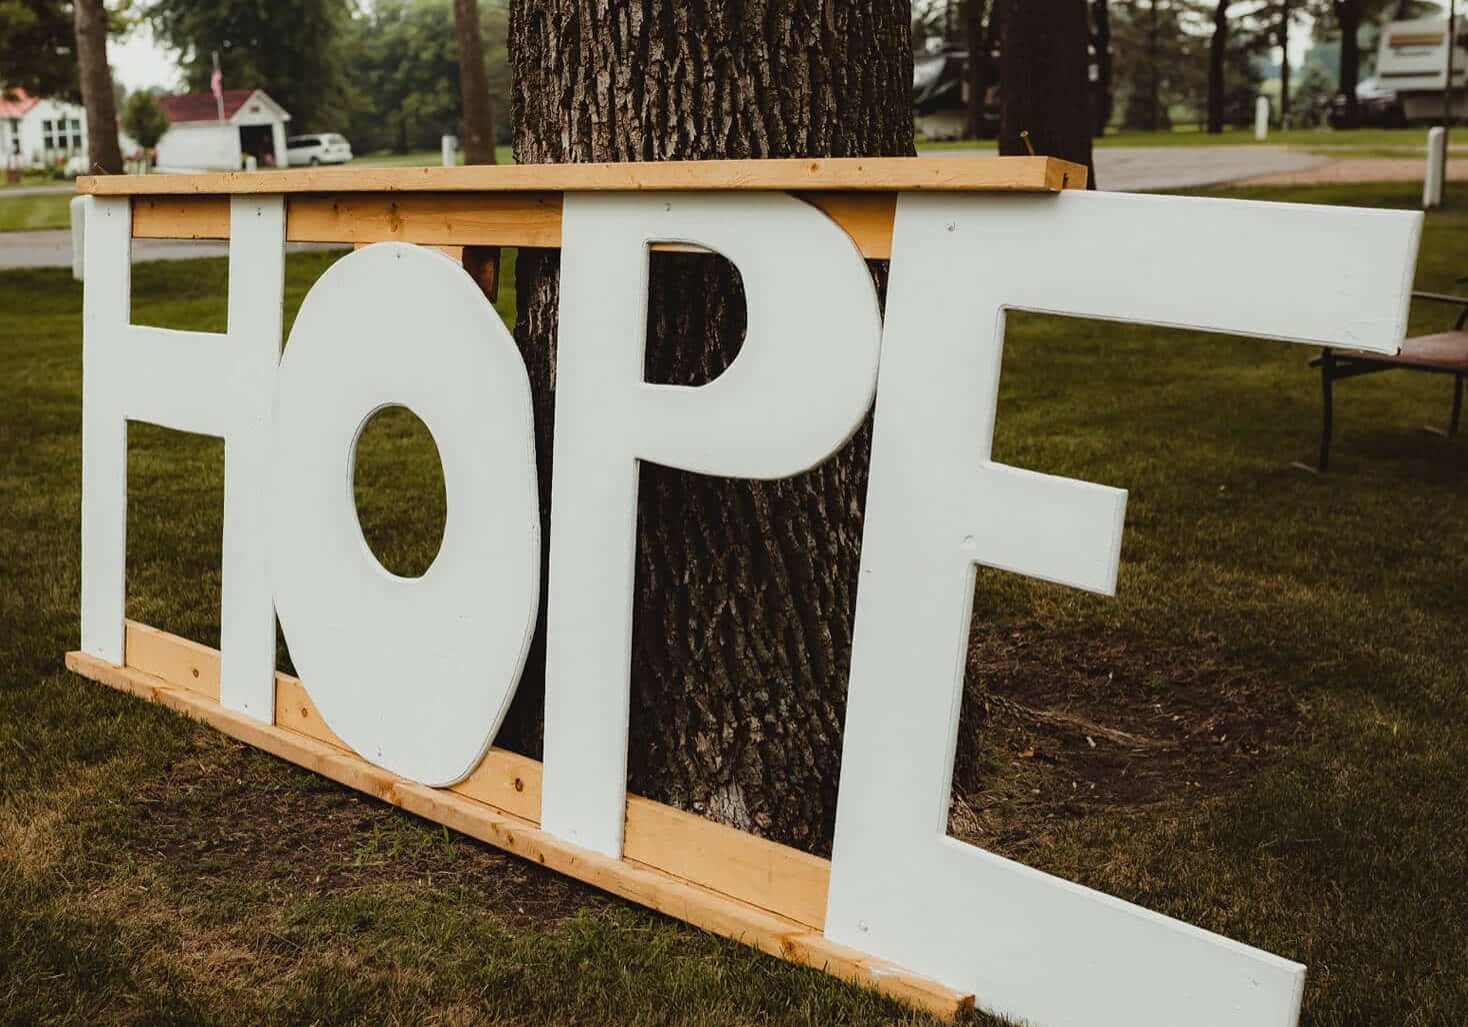 A sign displaying hope for cancer patients.